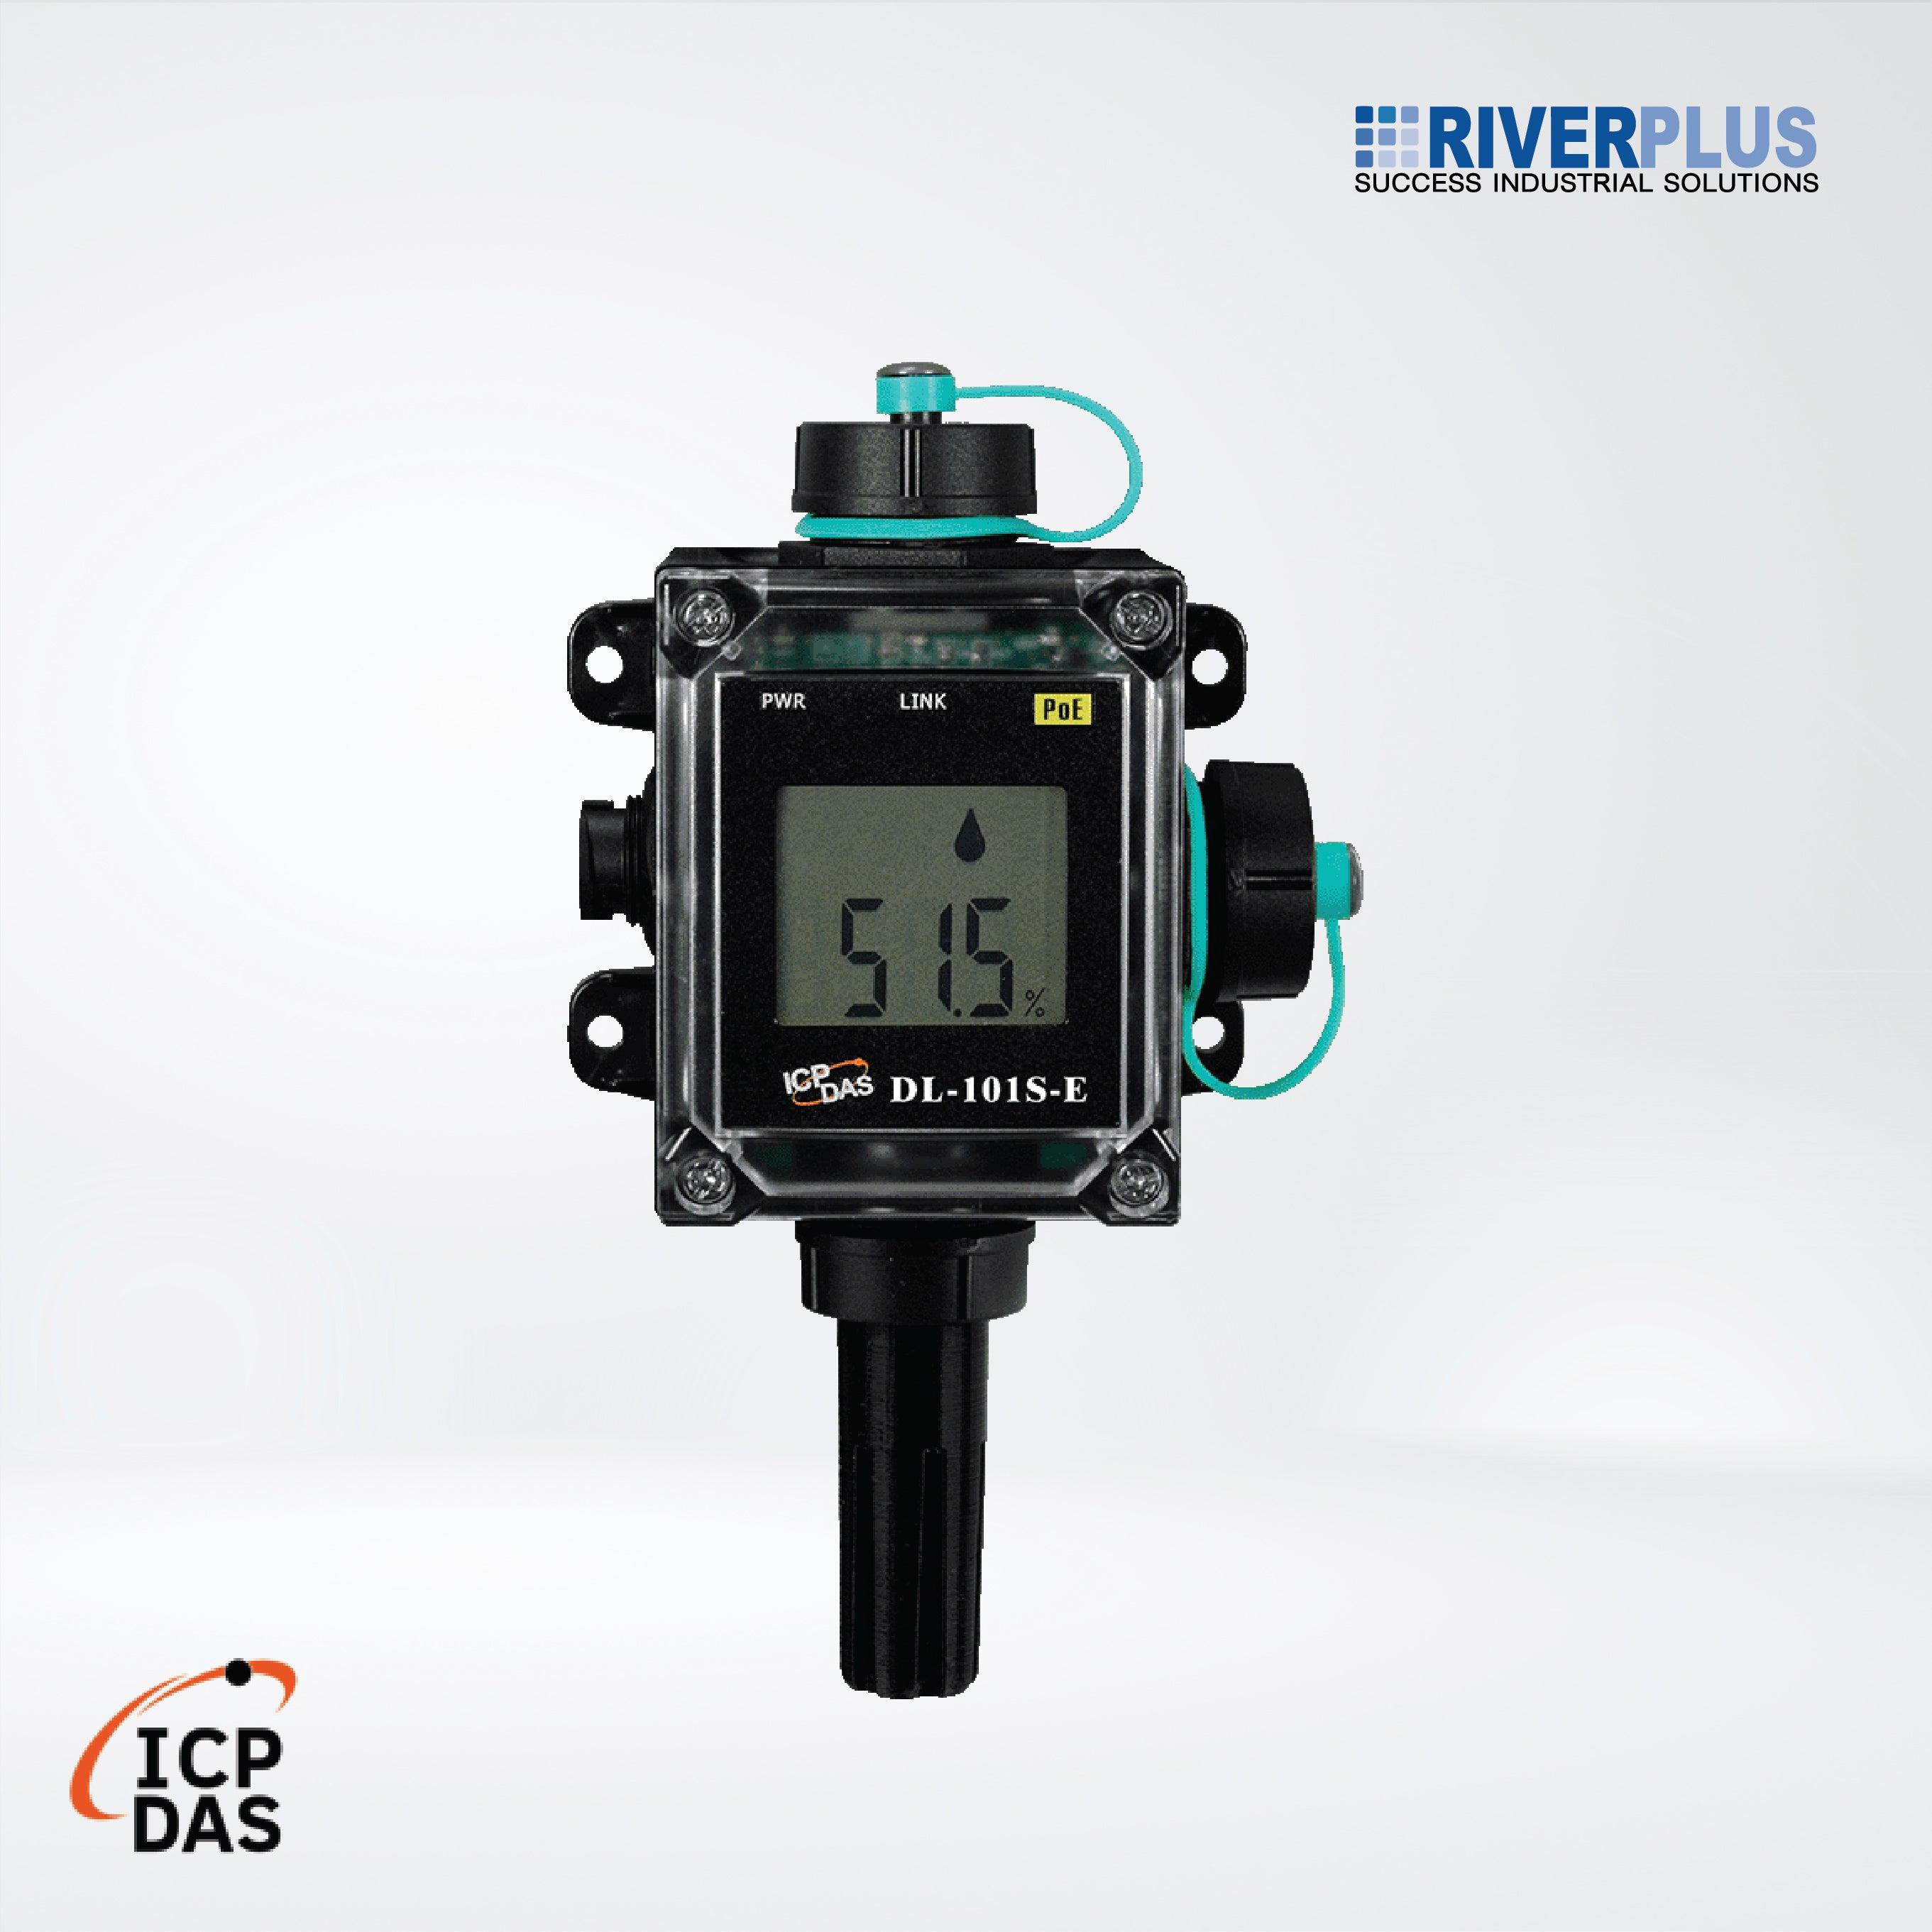 DL-101S-E IP66 Remote Temperature/Humidity/Dew Point Data Logger - Riverplus